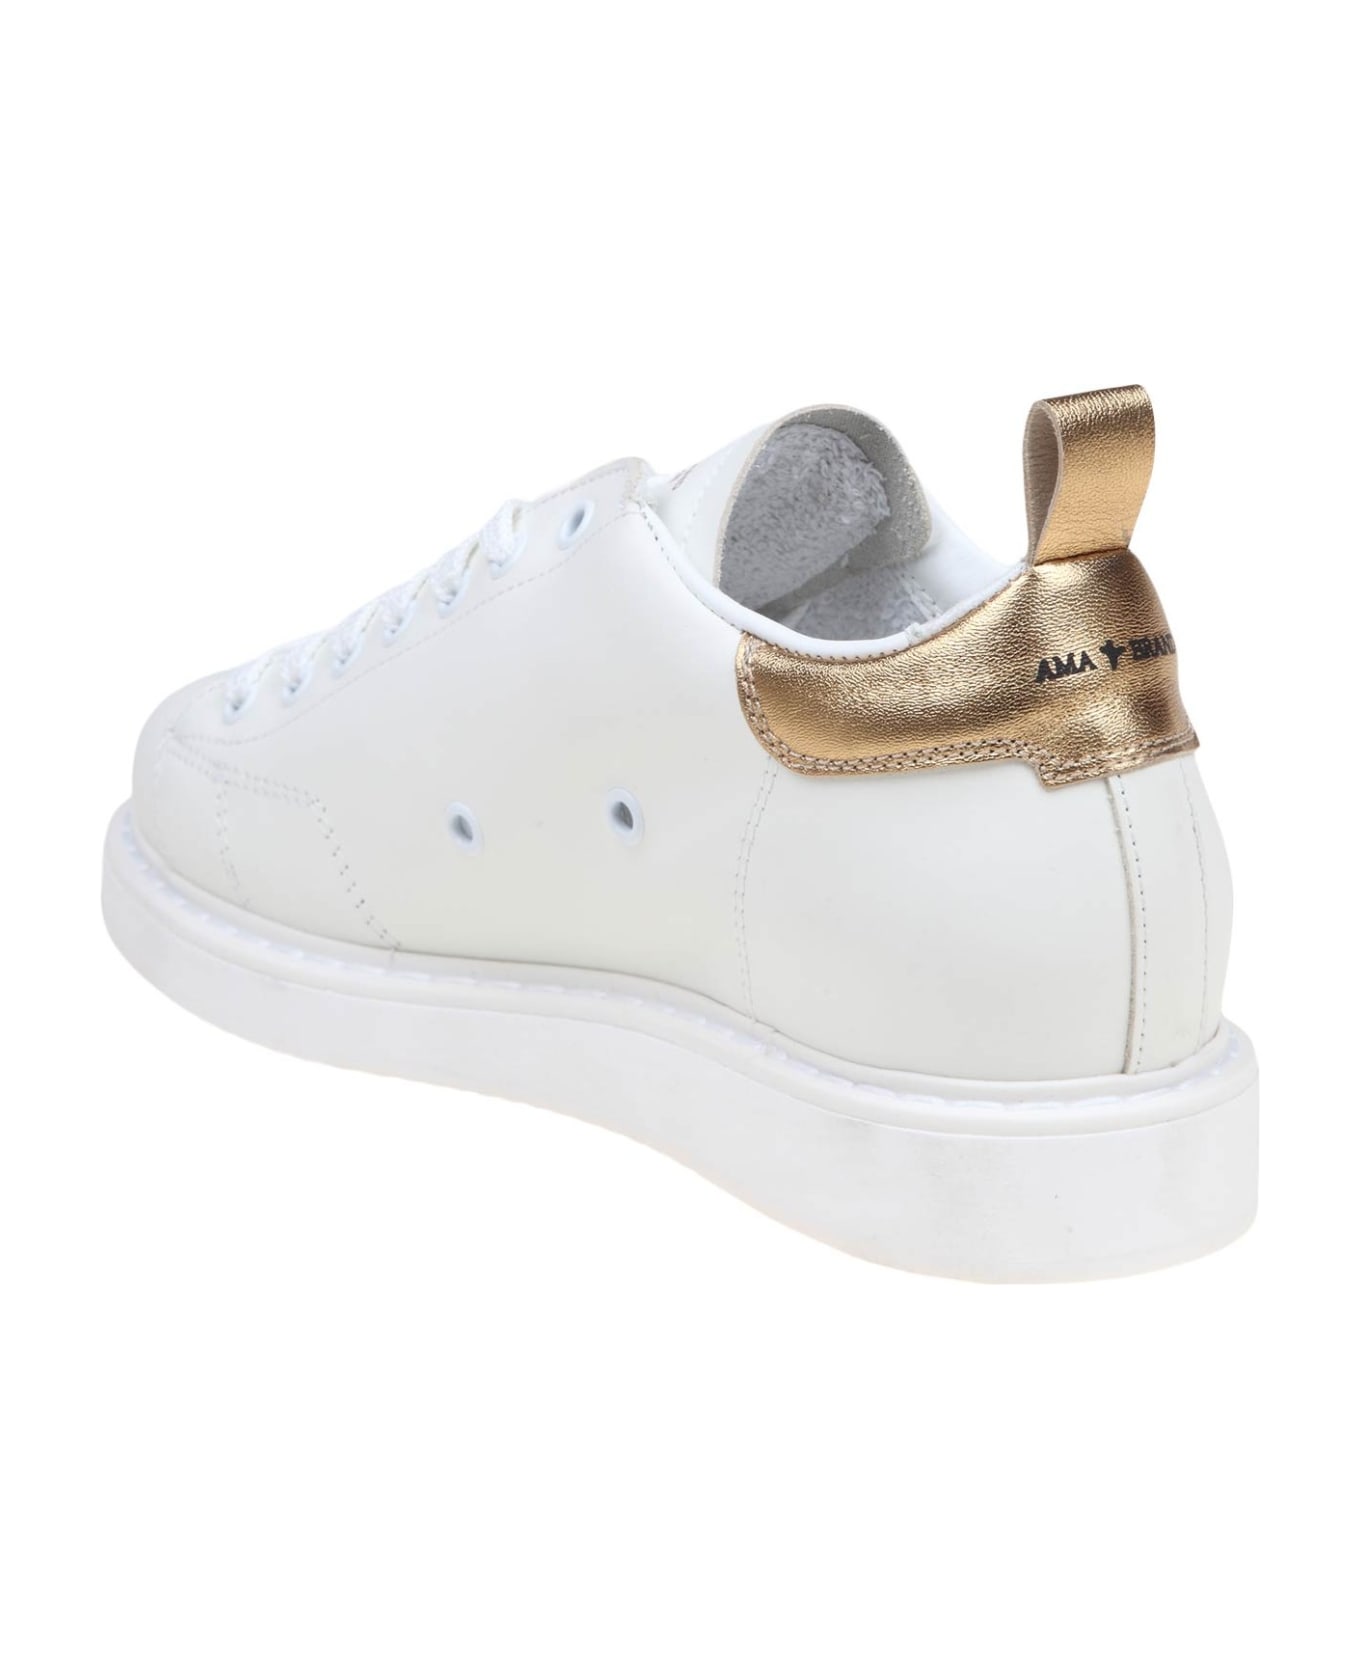 AMA-BRAND White And Gold Leather Sneakers - WHITE/GOLD スニーカー